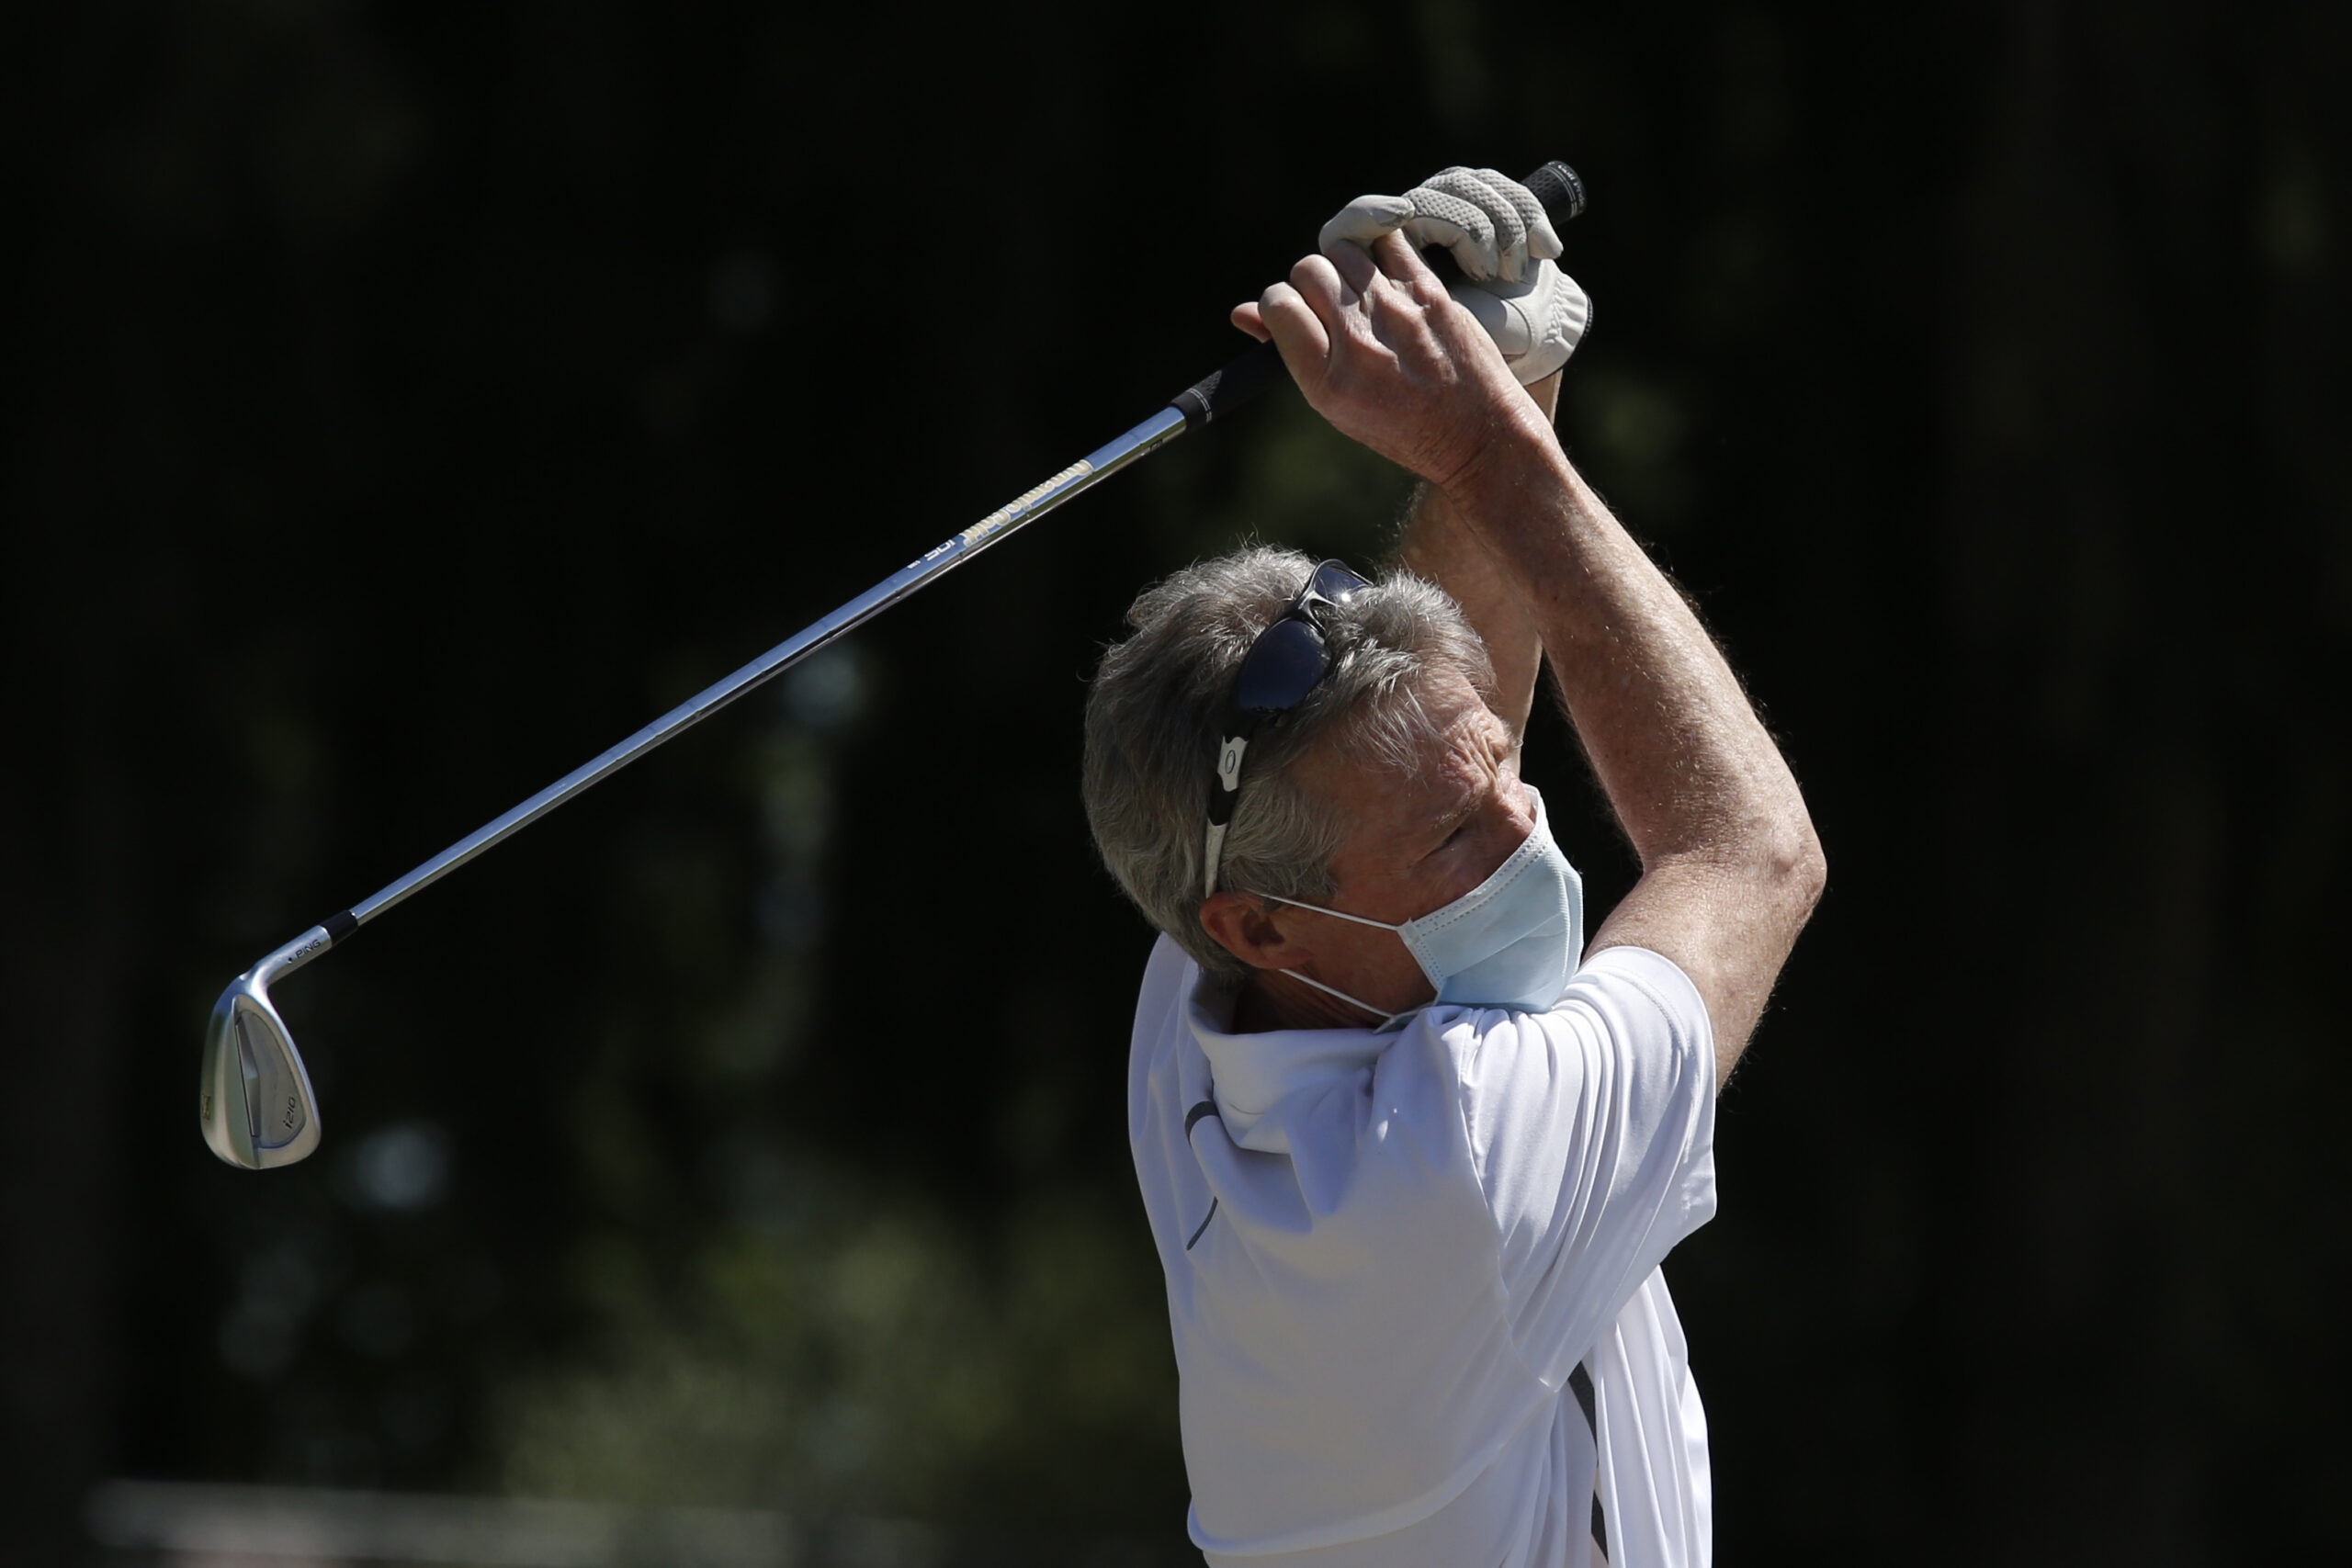 A golfer takes a practice swing while wearing a mask in California